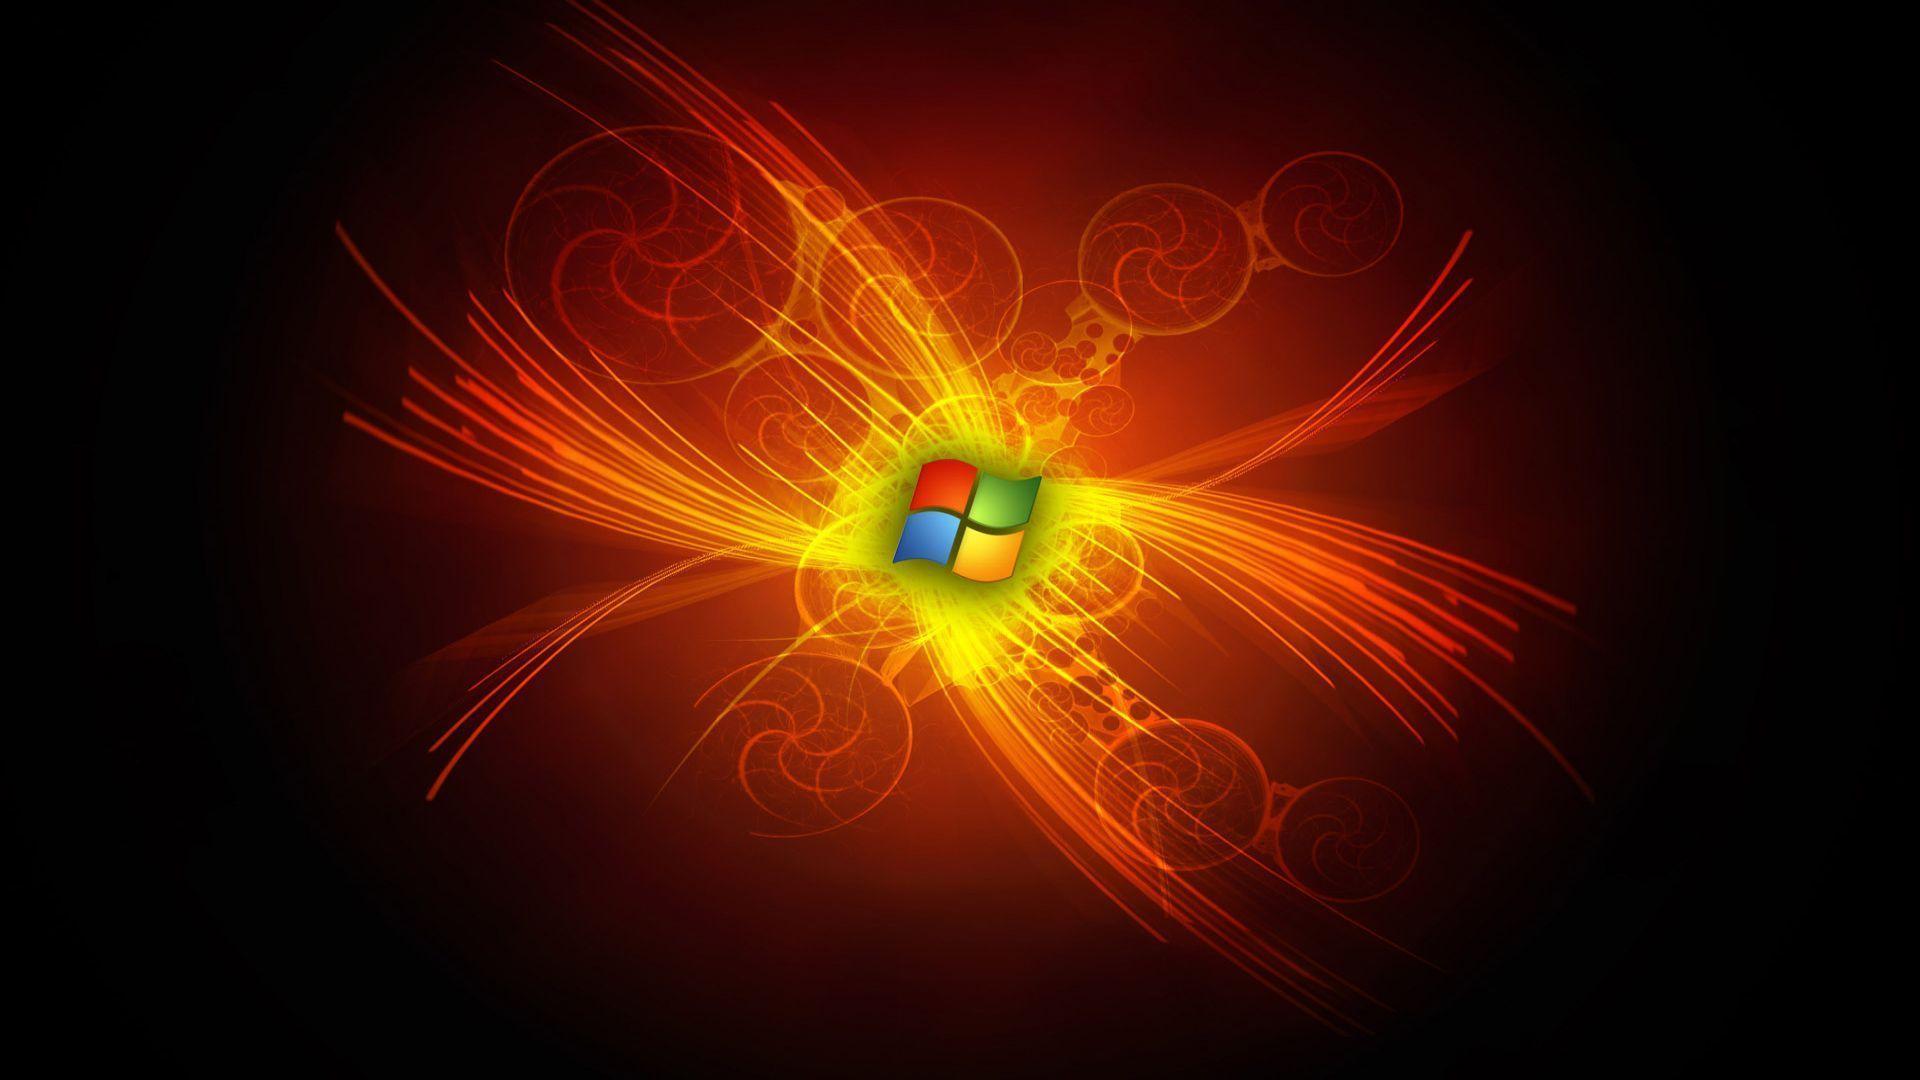 Windows 7 Wallpapers 1920x1080 - Wallpaper Cave
 Full Hd Wallpapers For Windows 8 1920x1080